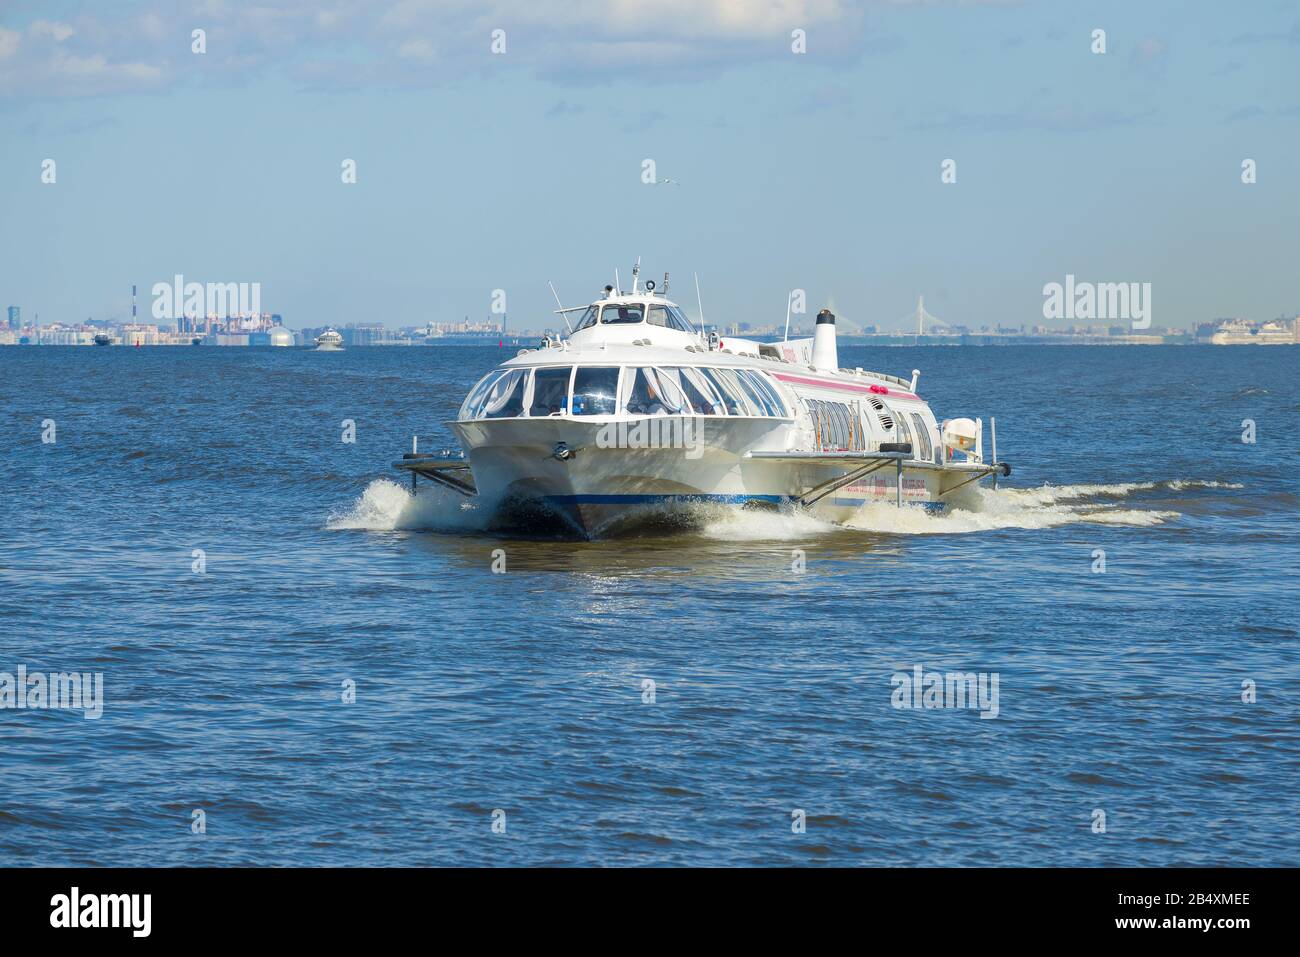 PETERHOF, RUSSIA - MAY 30, 2017: Soviet hydrofoil ship Meteor series in the waters of the Gulf of Finland Stock Photo